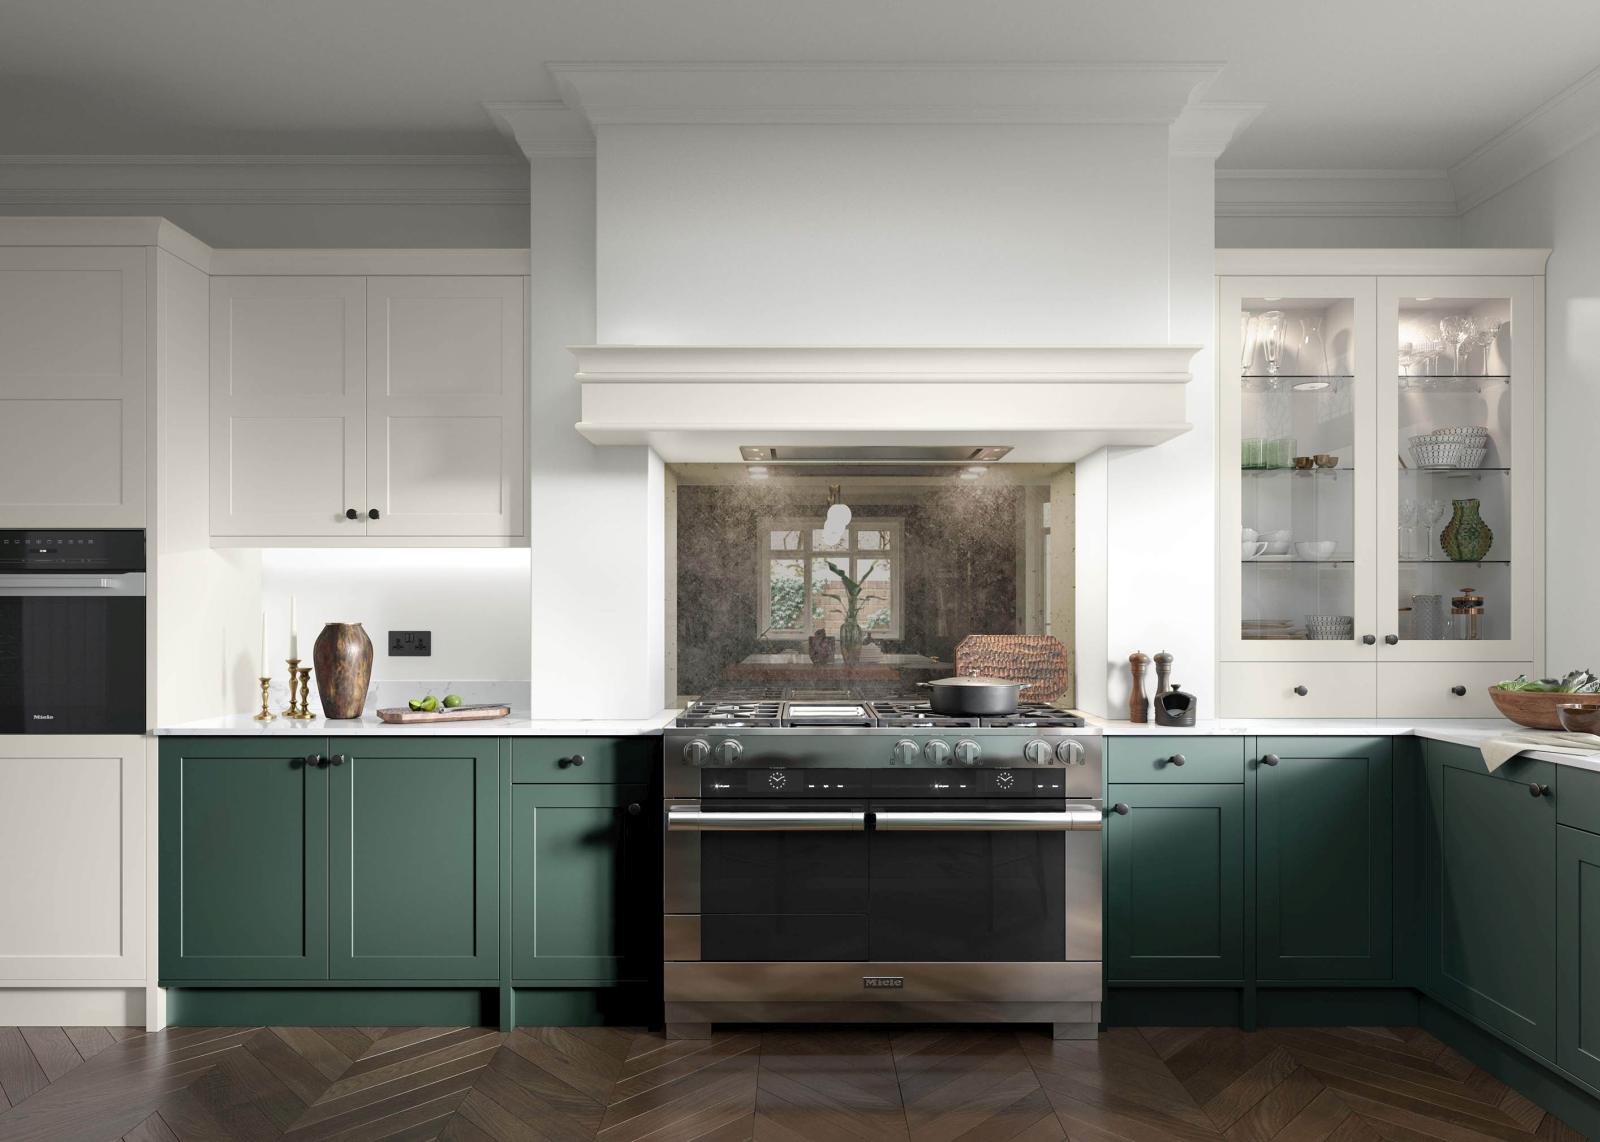 Smooth-finish, slim-frame, shaker-style kitchen painted heritage green and porcelain featuring range cooker with above canopy housing recessed extractor fan. Vintage glass backsplash 